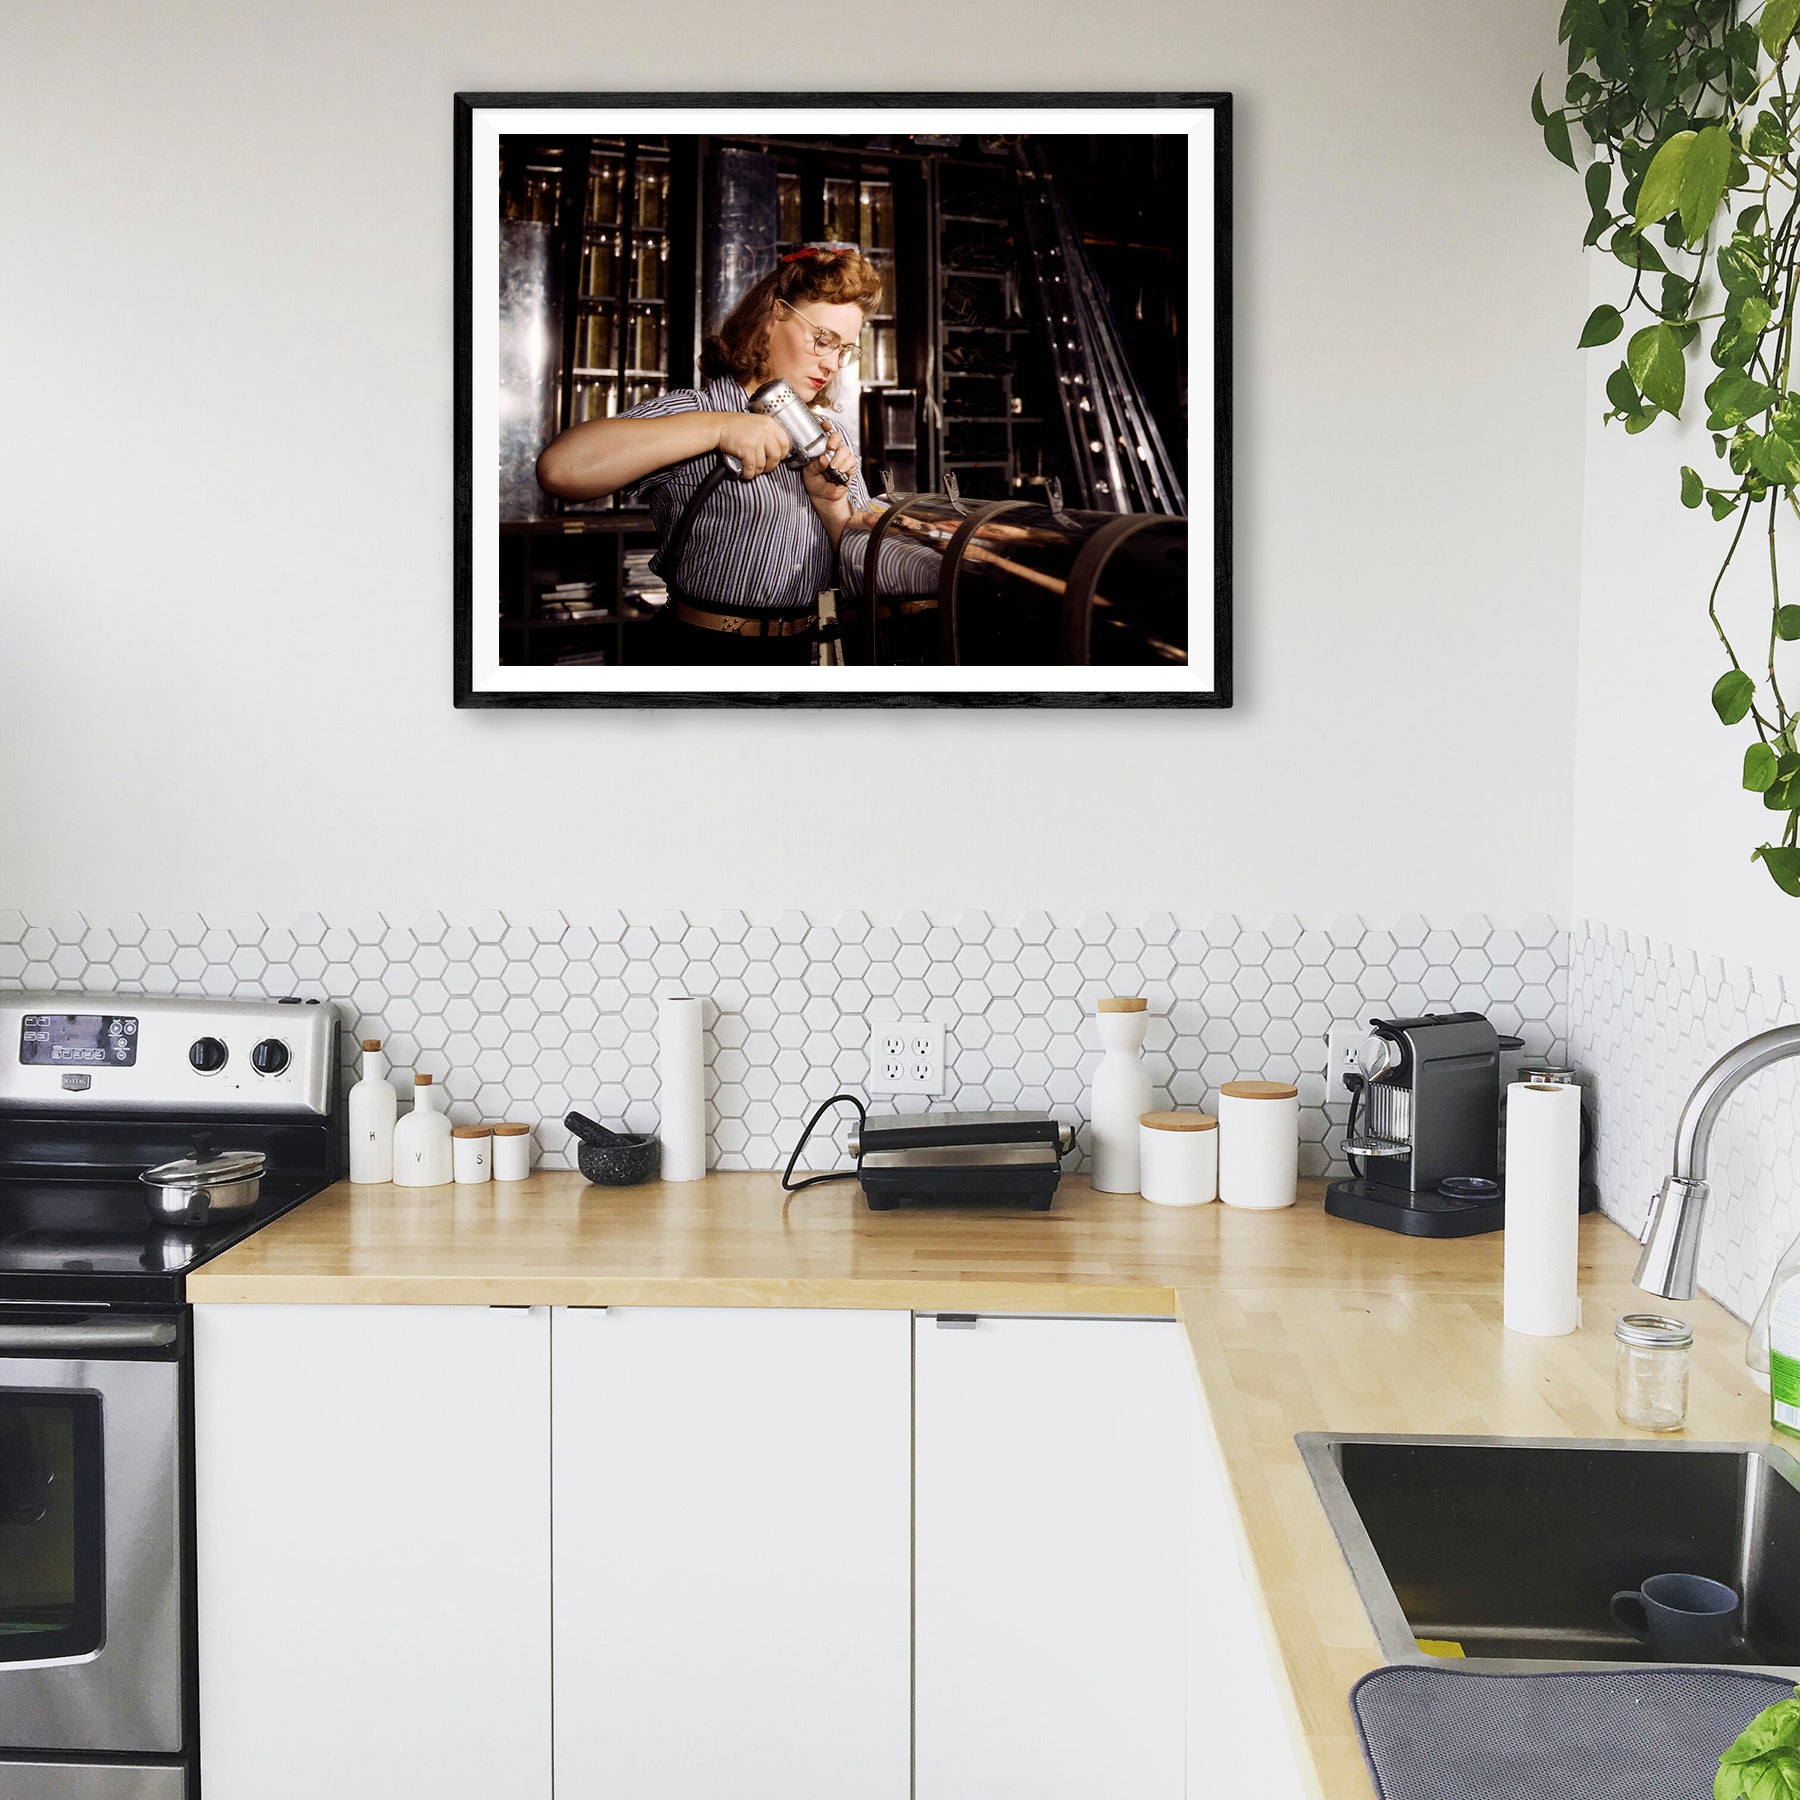 A mockup of a framed paper print hanging in a kitchen, featuring a vintage photograph of a woman working at North American Aviation